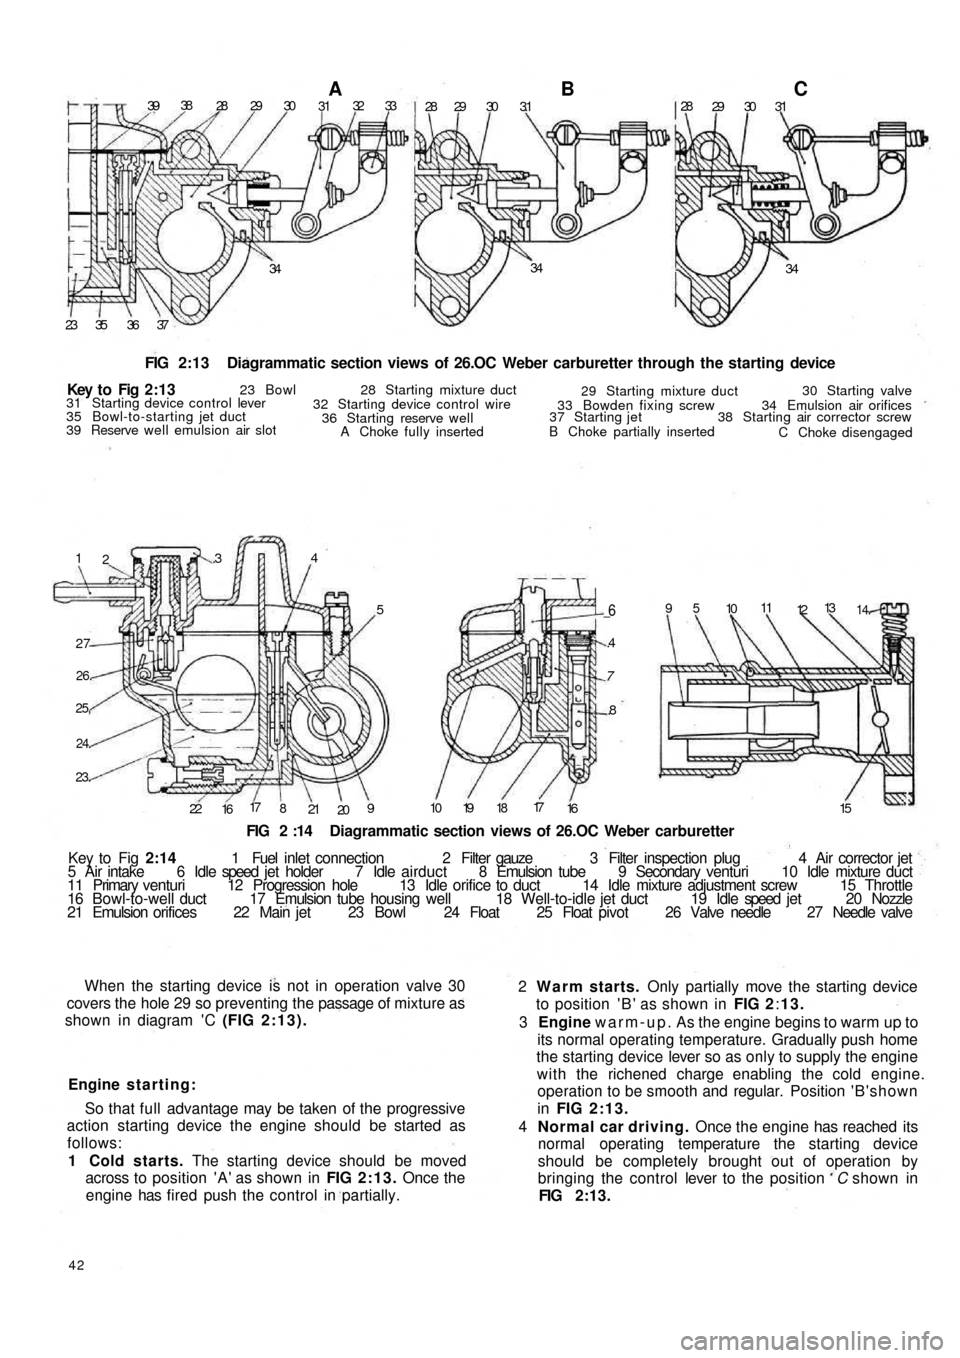 FIAT 500 1960 1.G Workshop Manual 3938
28 29 30A3132 33
28 29 30 3.1B28
29 30 31C
34 34
34
37 36 35 23
FIG 2:13  Diagrammatic section views of 26.OC Weber carburetter through the starting device
1
2.34
5
27
26.
25,
24.
23.
22
1617
8
2